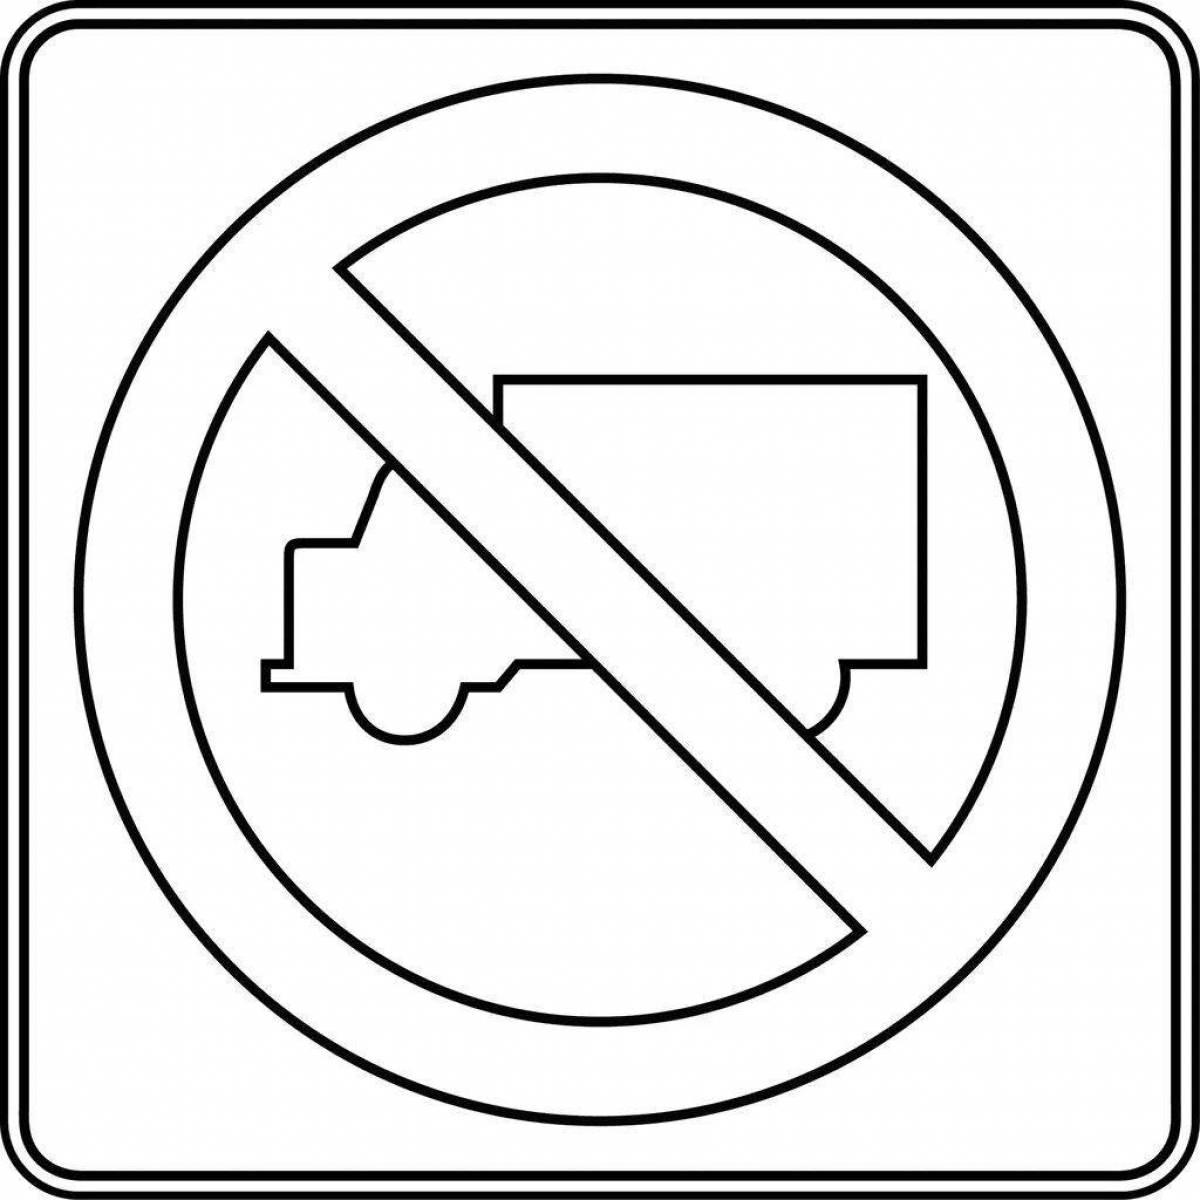 Coloring page funny safety sign